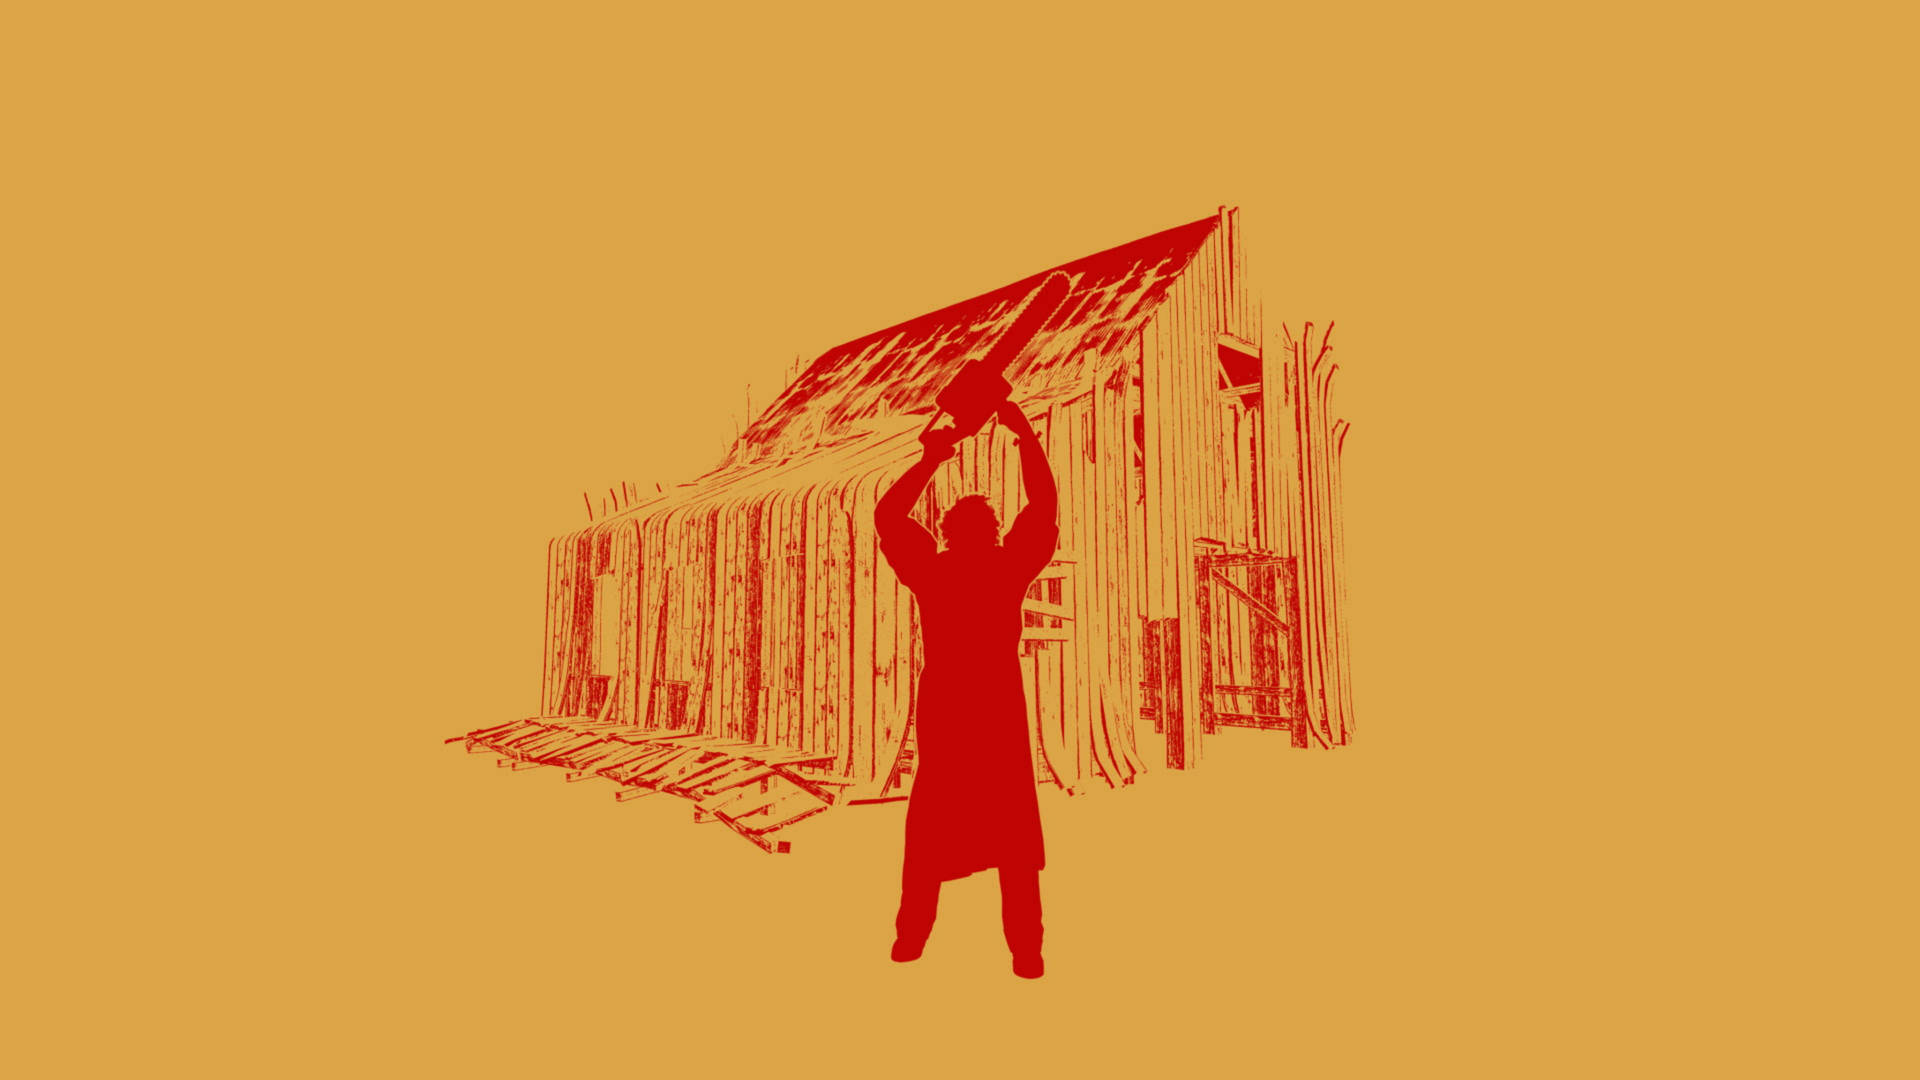 Leatherface Silhouette Artwork Background